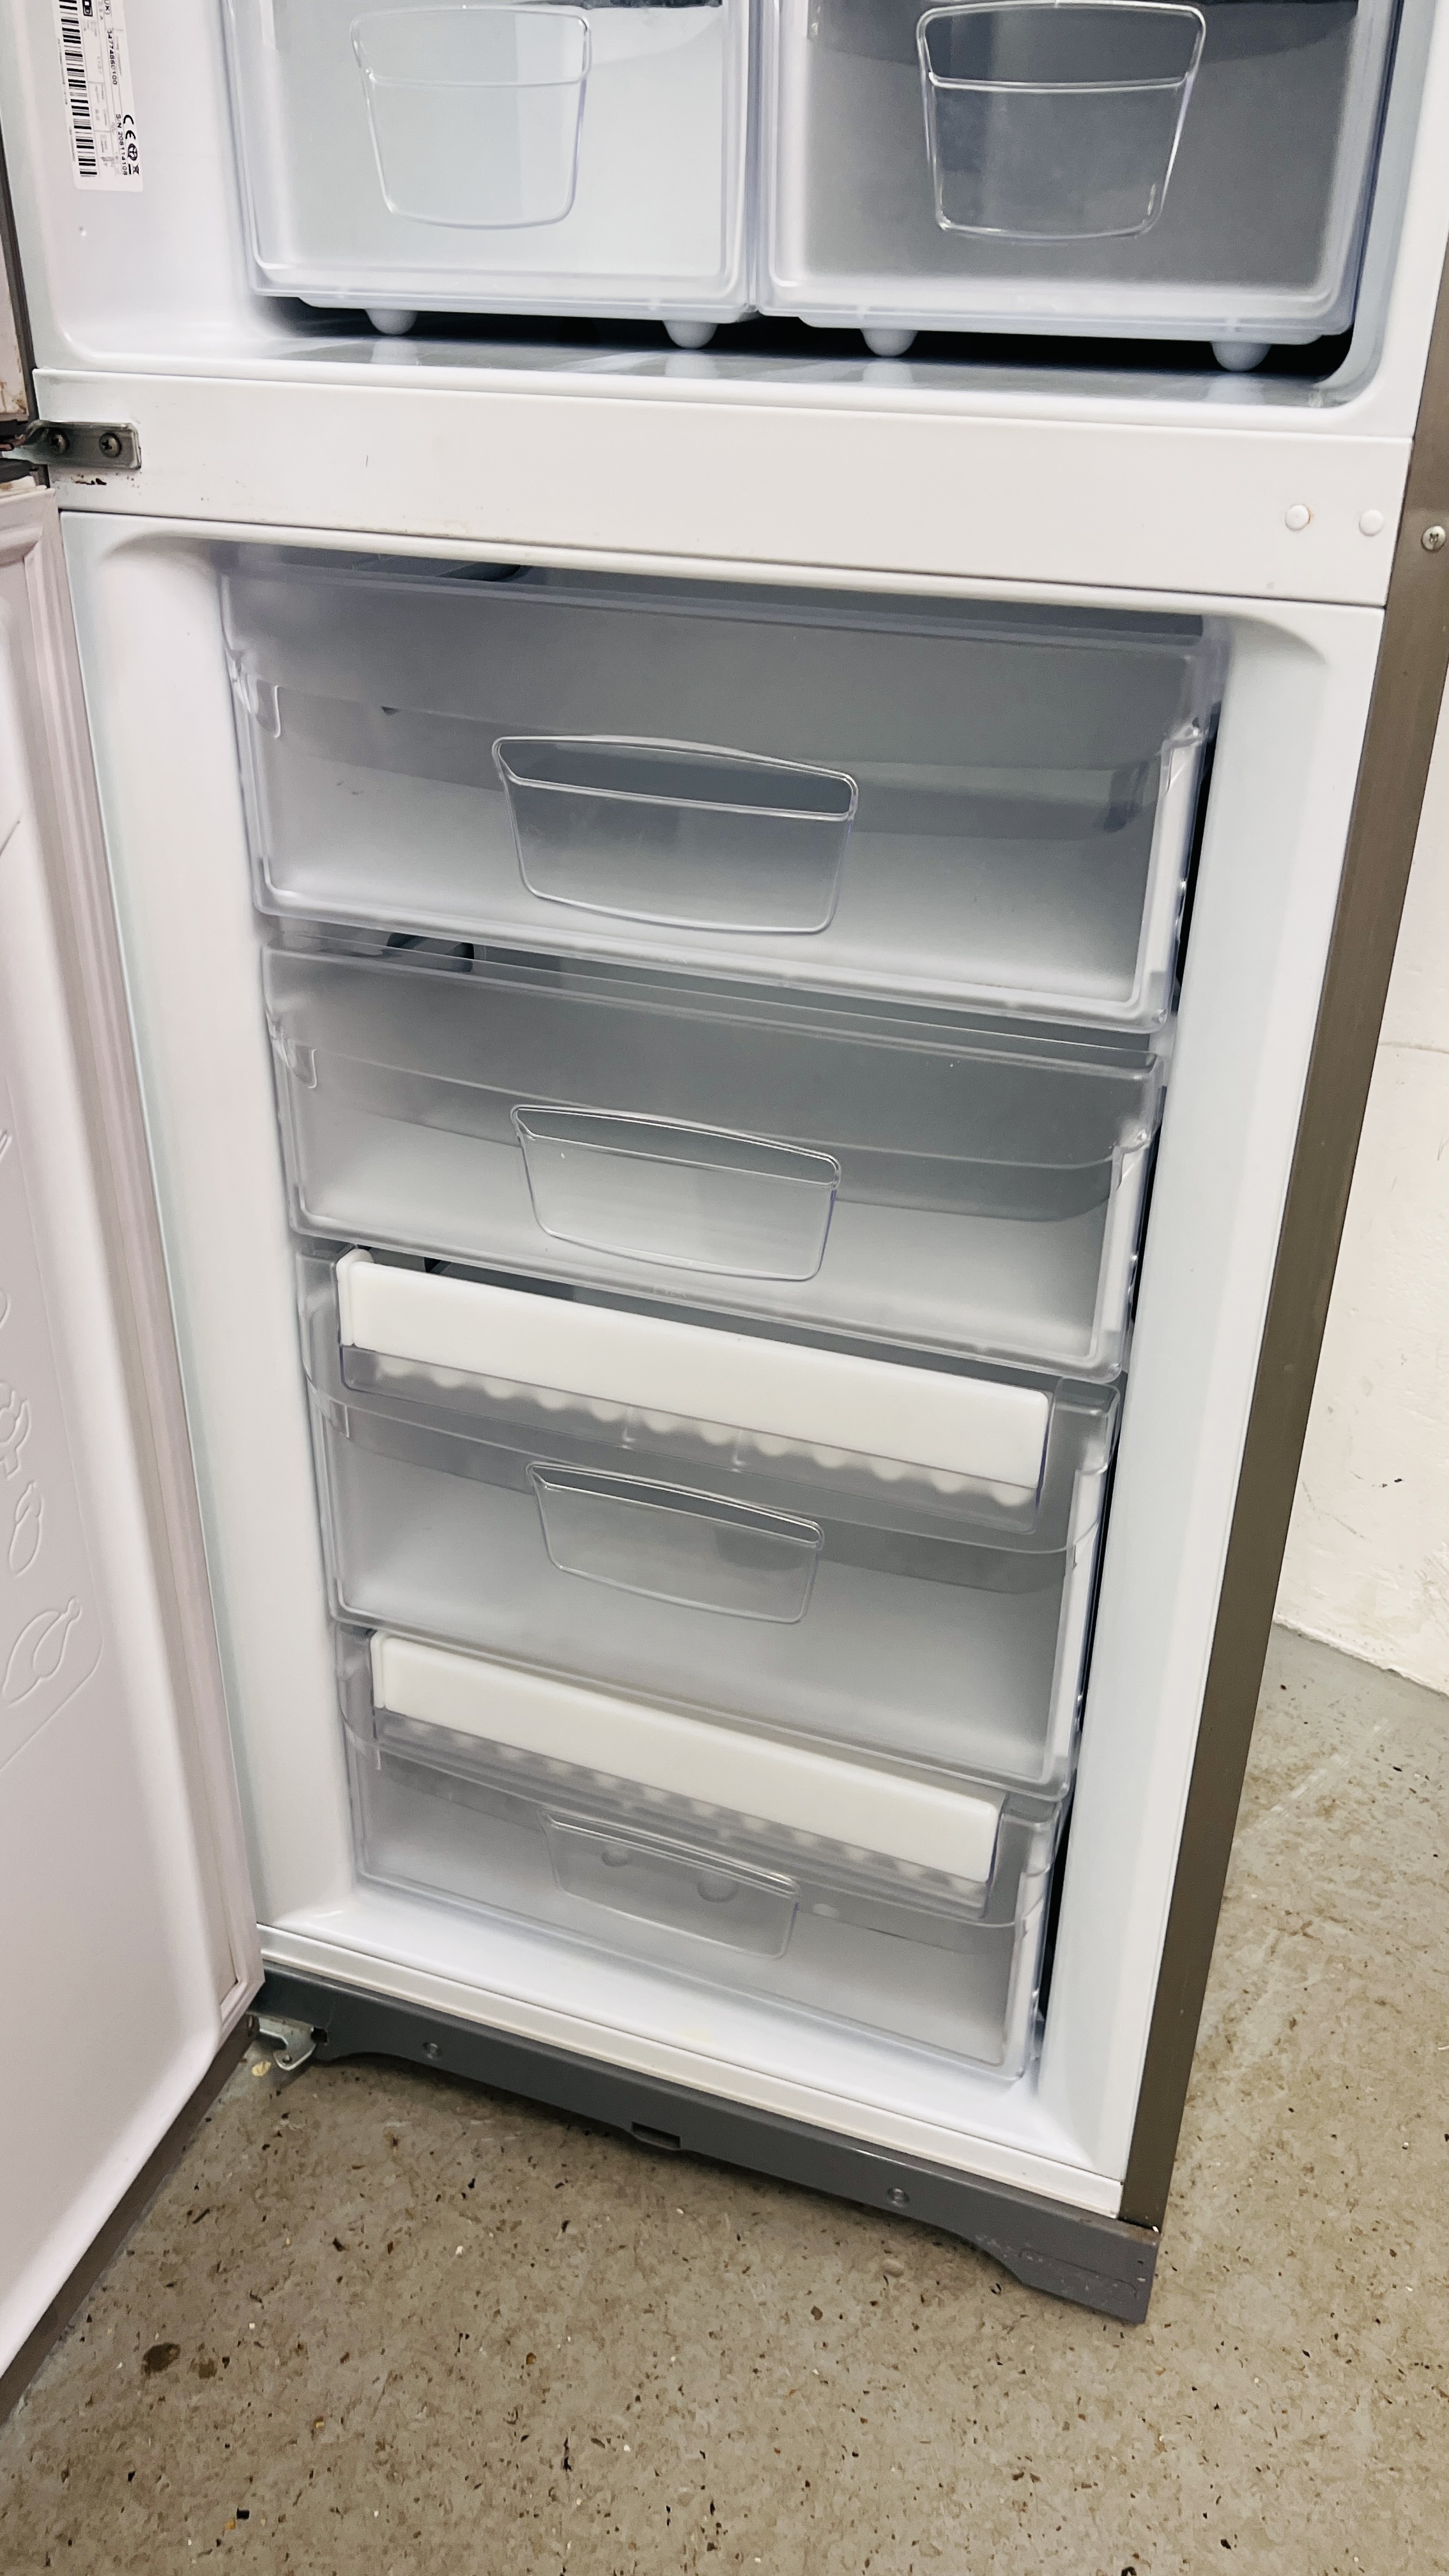 A INDISIT SILVER FINISH FRIDGE FREEZER - SOLD AS SEEN. - Image 10 of 11